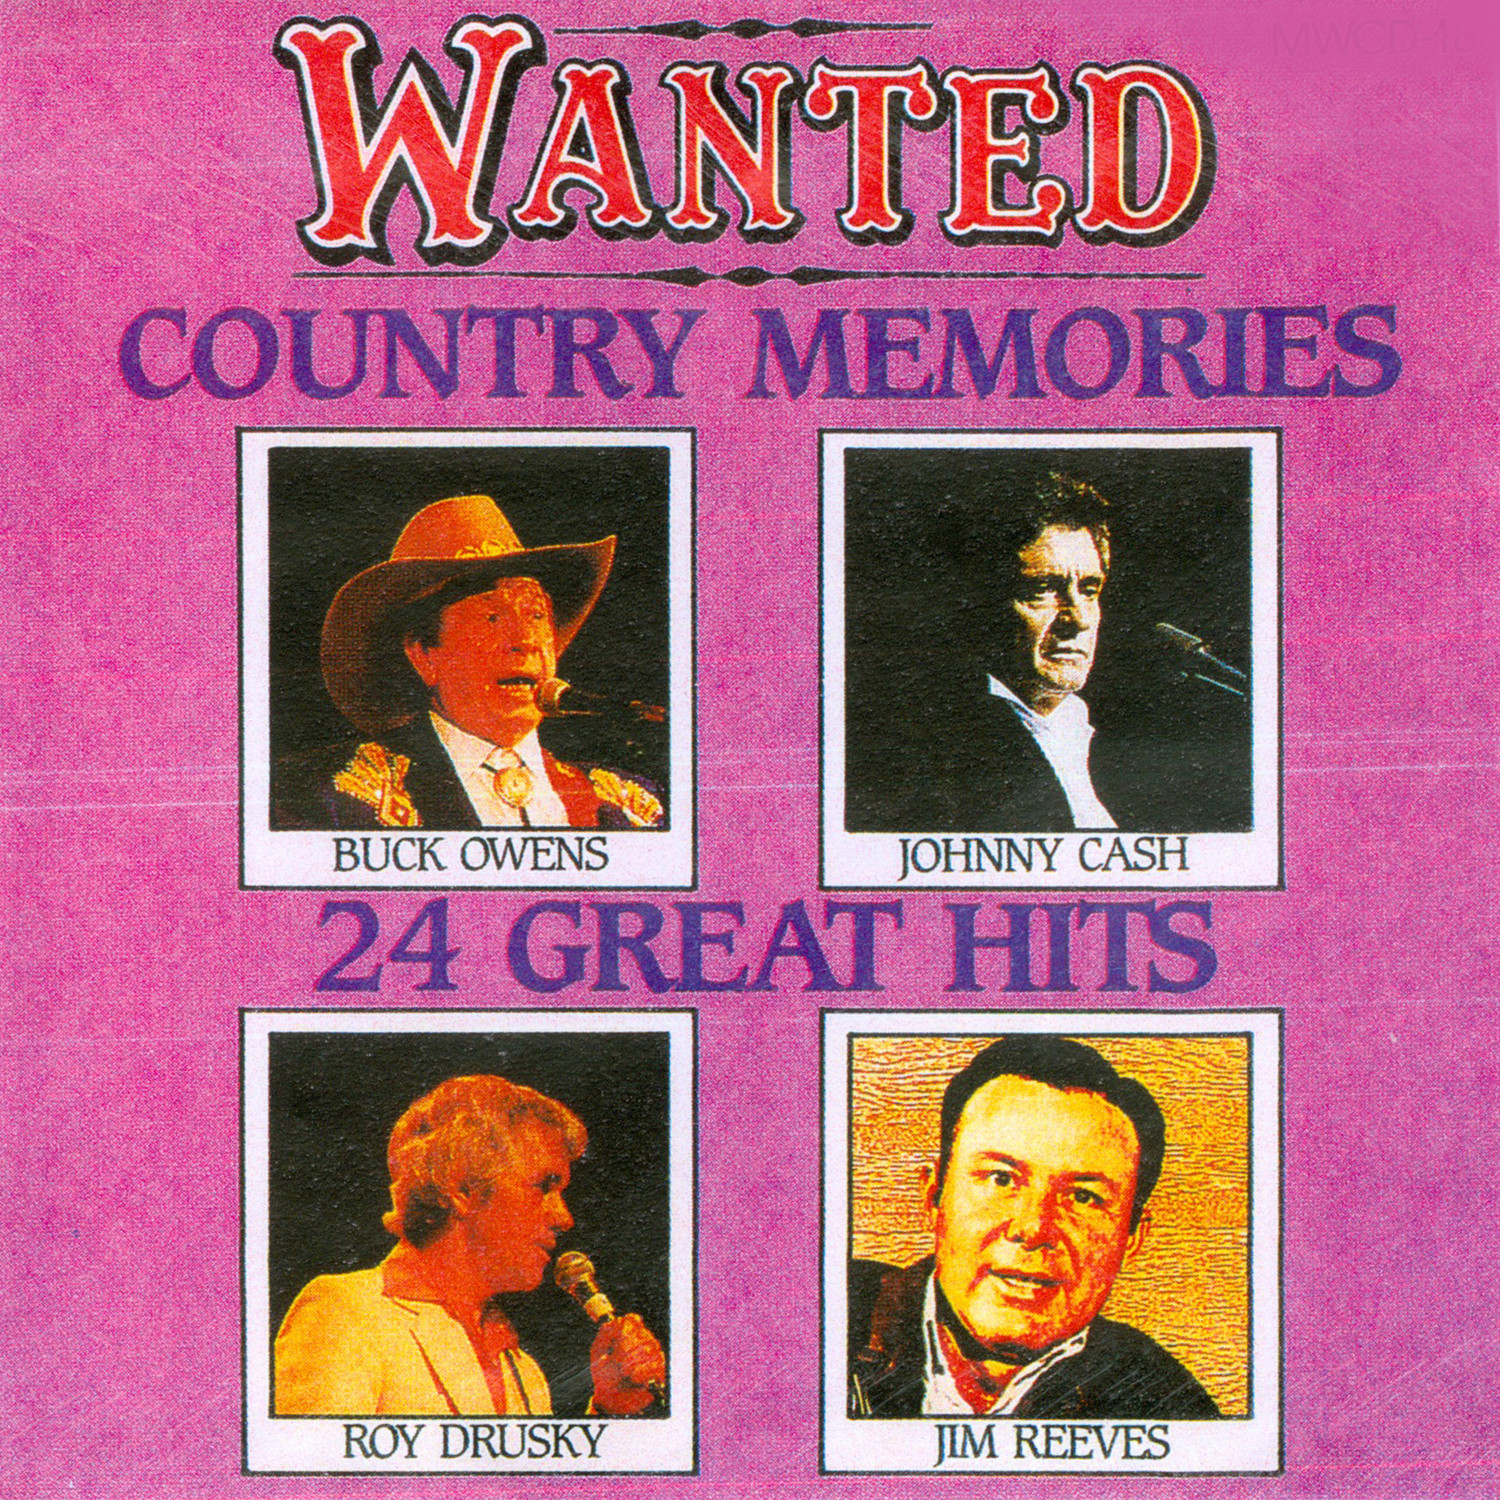 Wanted - Country Memories